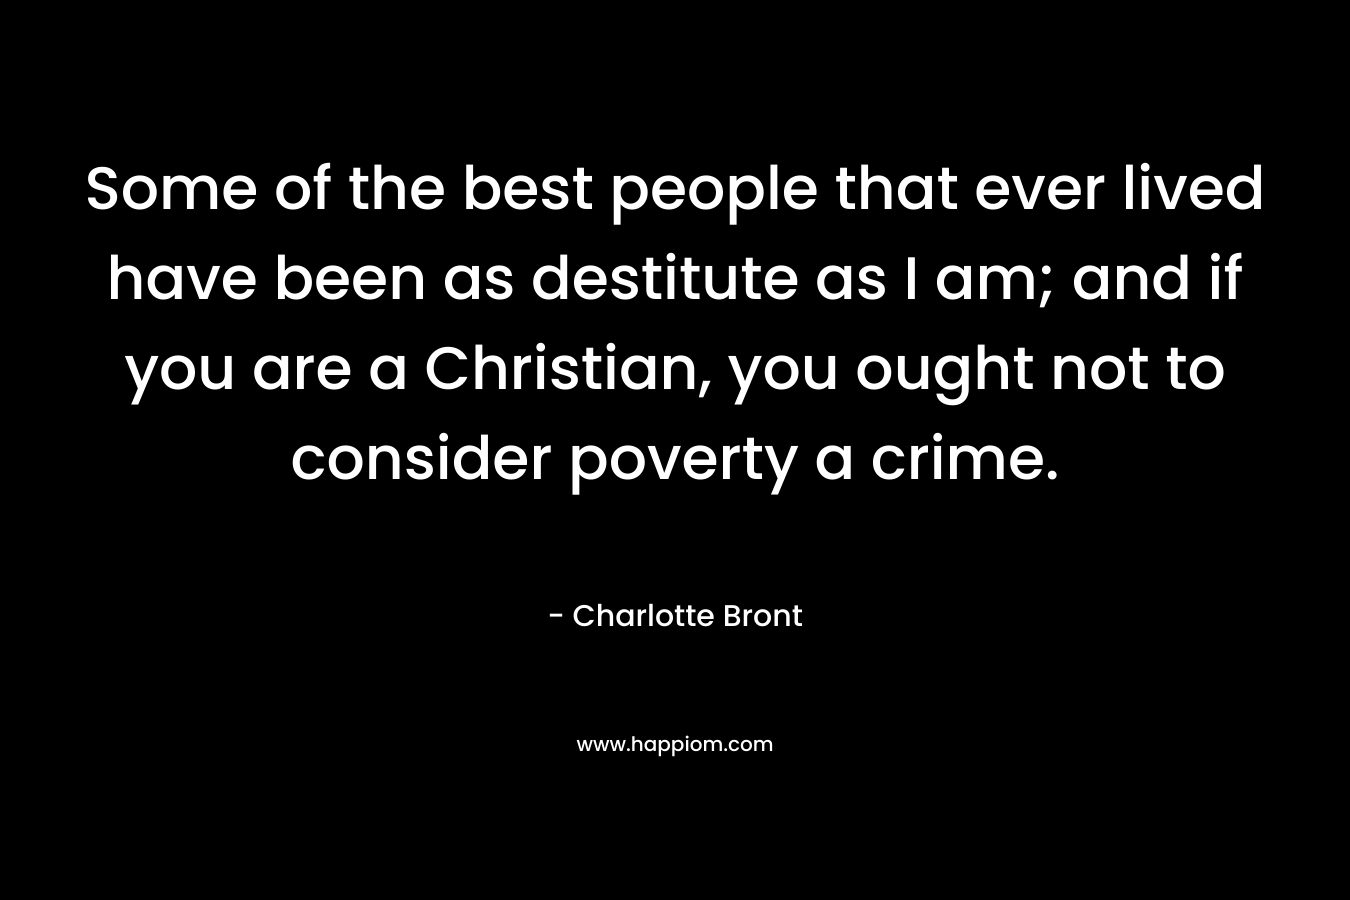 Some of the best people that ever lived have been as destitute as I am; and if you are a Christian, you ought not to consider poverty a crime.